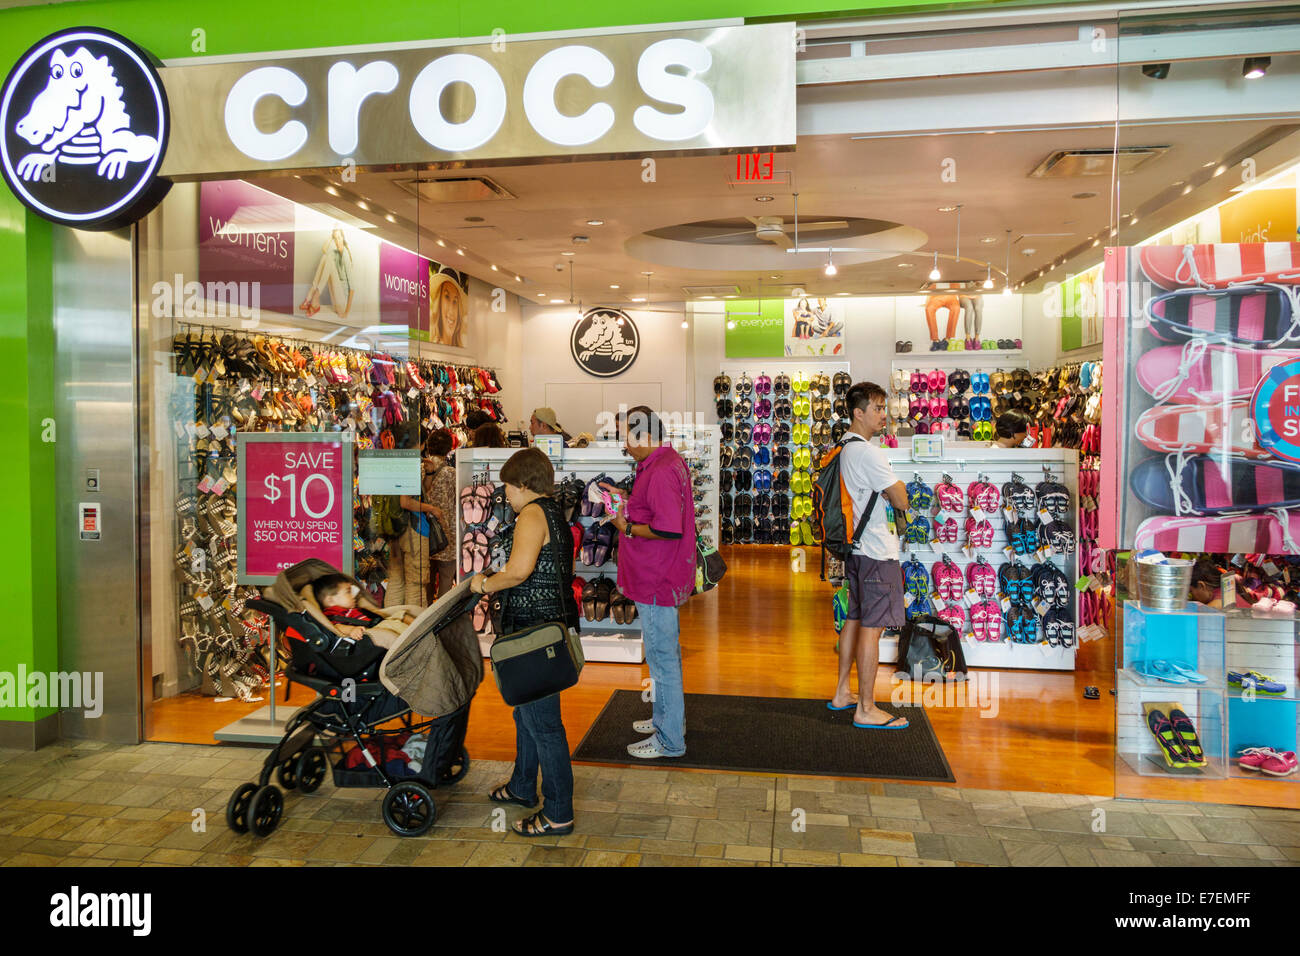 croc store eagan outlet mall